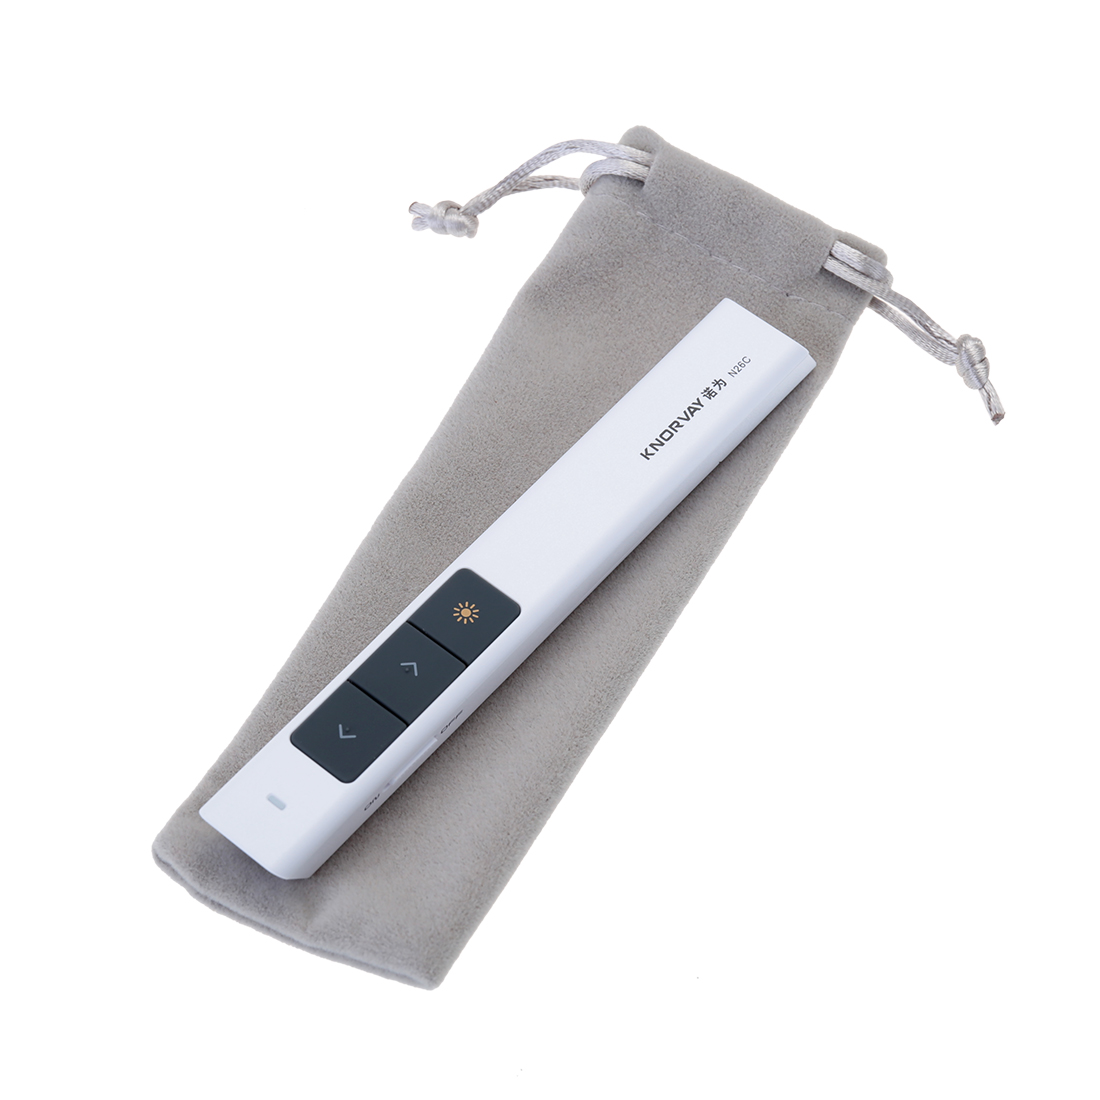 Knorvay N26 Laser Pen Clicker Remote Control for Powerpoint Presentation Pointer